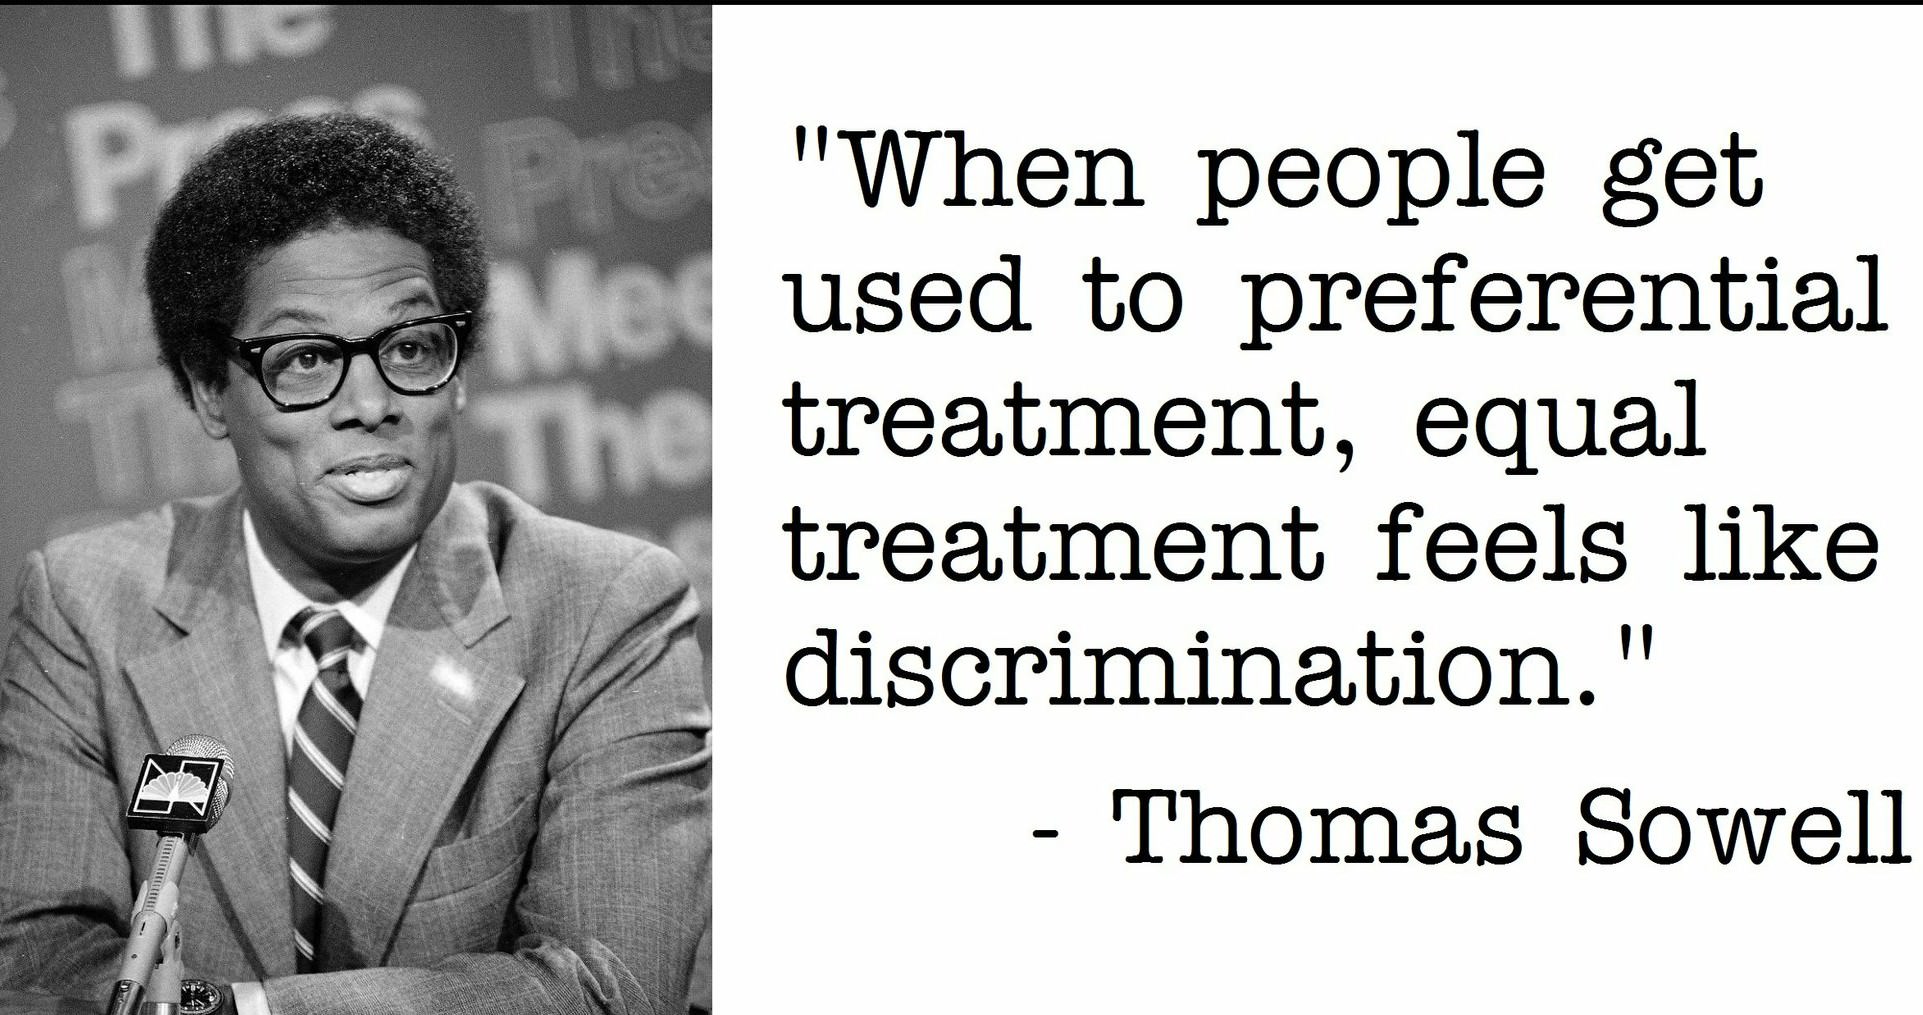 thomas sowell young - Pe "When people get used to preferential treatment, equal treatment feels discrimination." Thomas Sowell